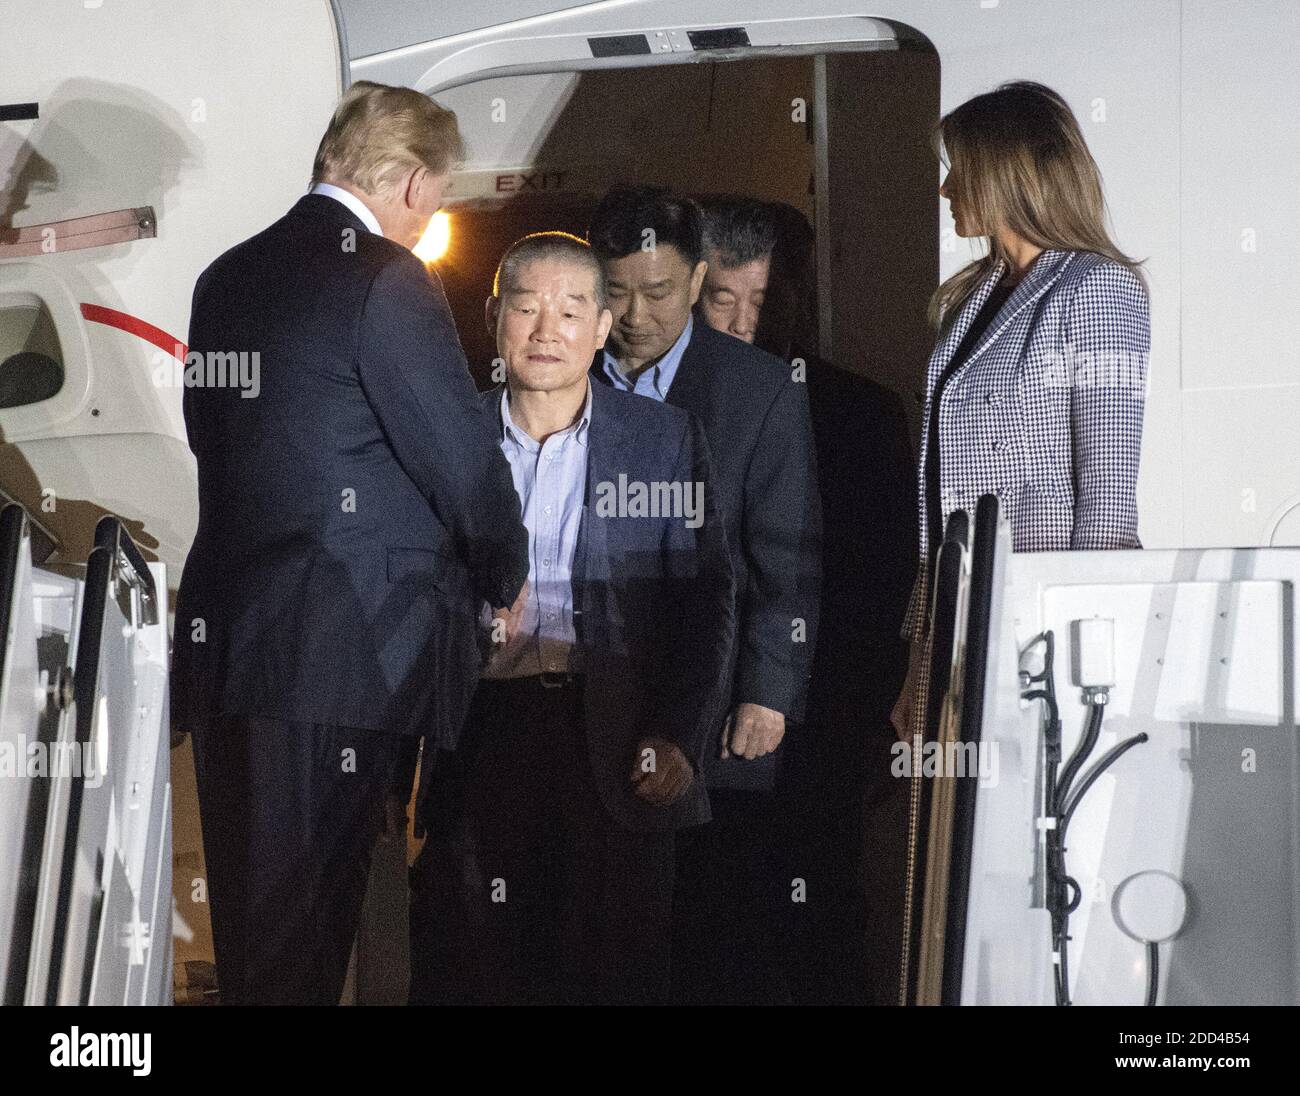 United States President Donald J. Trump welcomes Kim Dong Chul, Kim Hak Song and Tony Kim back to the US at Joint Base Andrews in Maryland on Thursday, May 10, 2018. The three men were imprisoned in North Korea for periods ranging from one and two years. They were released to US Secretary of State Mike Pompeo as a good-will gesture in the lead-up to the talks between President Trump and North Korean leader Kim Jong Un. Photo by Ron Sachs/CNP/ABACAPRESS.COM Stock Photo